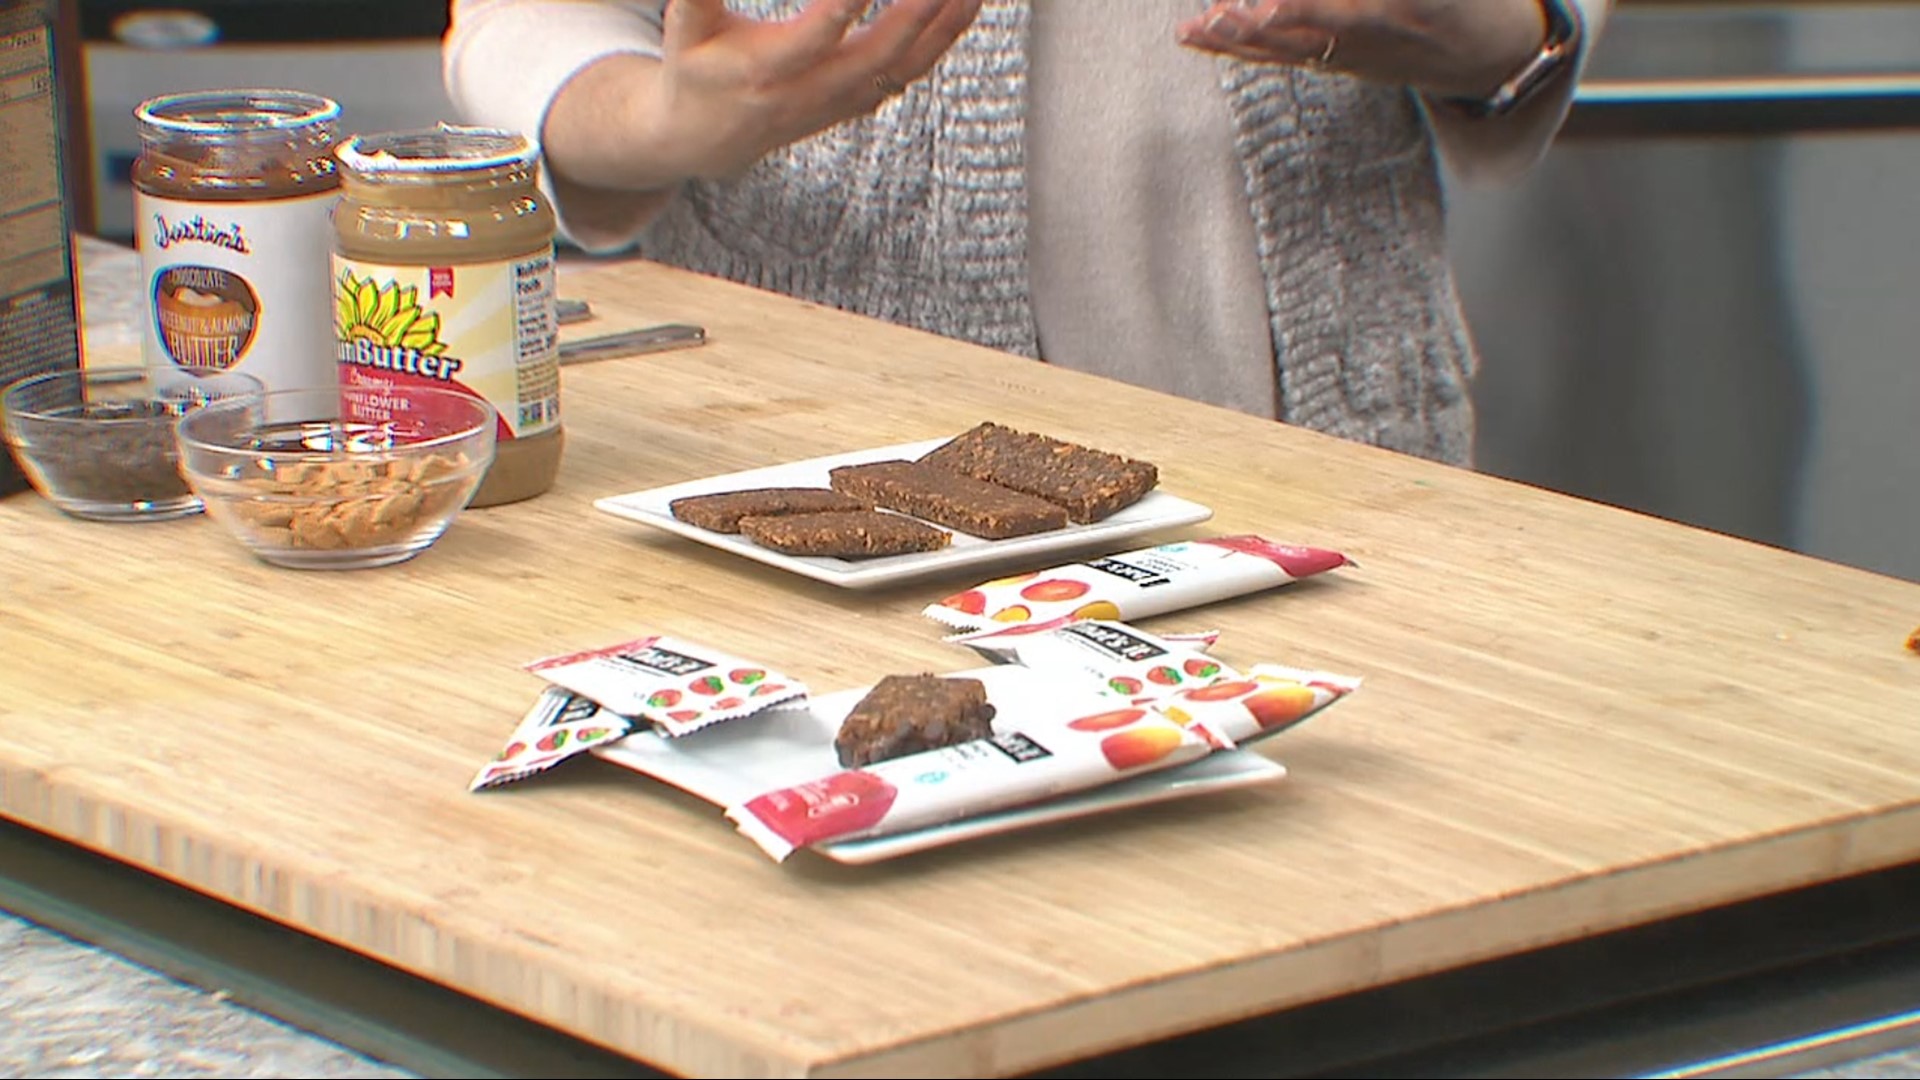 This week we have three different ways for you to make snack sandwiches with That's It Bars! They're sure to make your meal prep faster and easier.